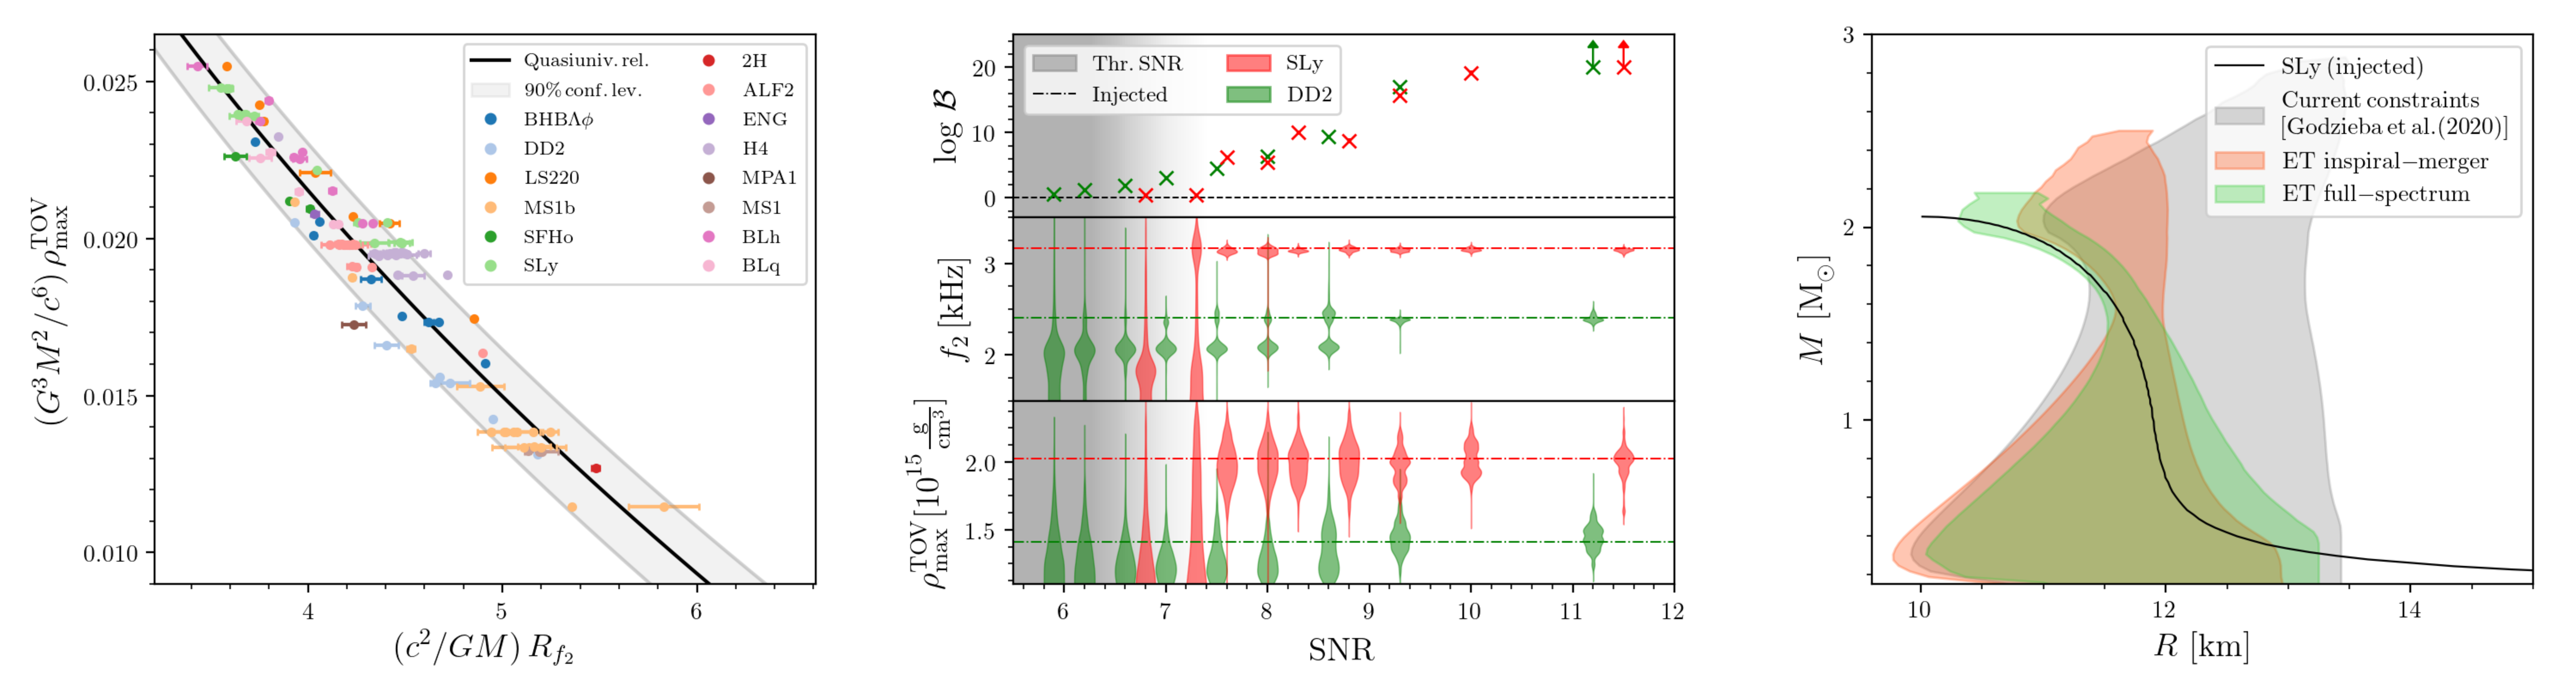 image-Constraints on the neutron star's maximum densities from postmerger gravitational-waves with third-generation observations